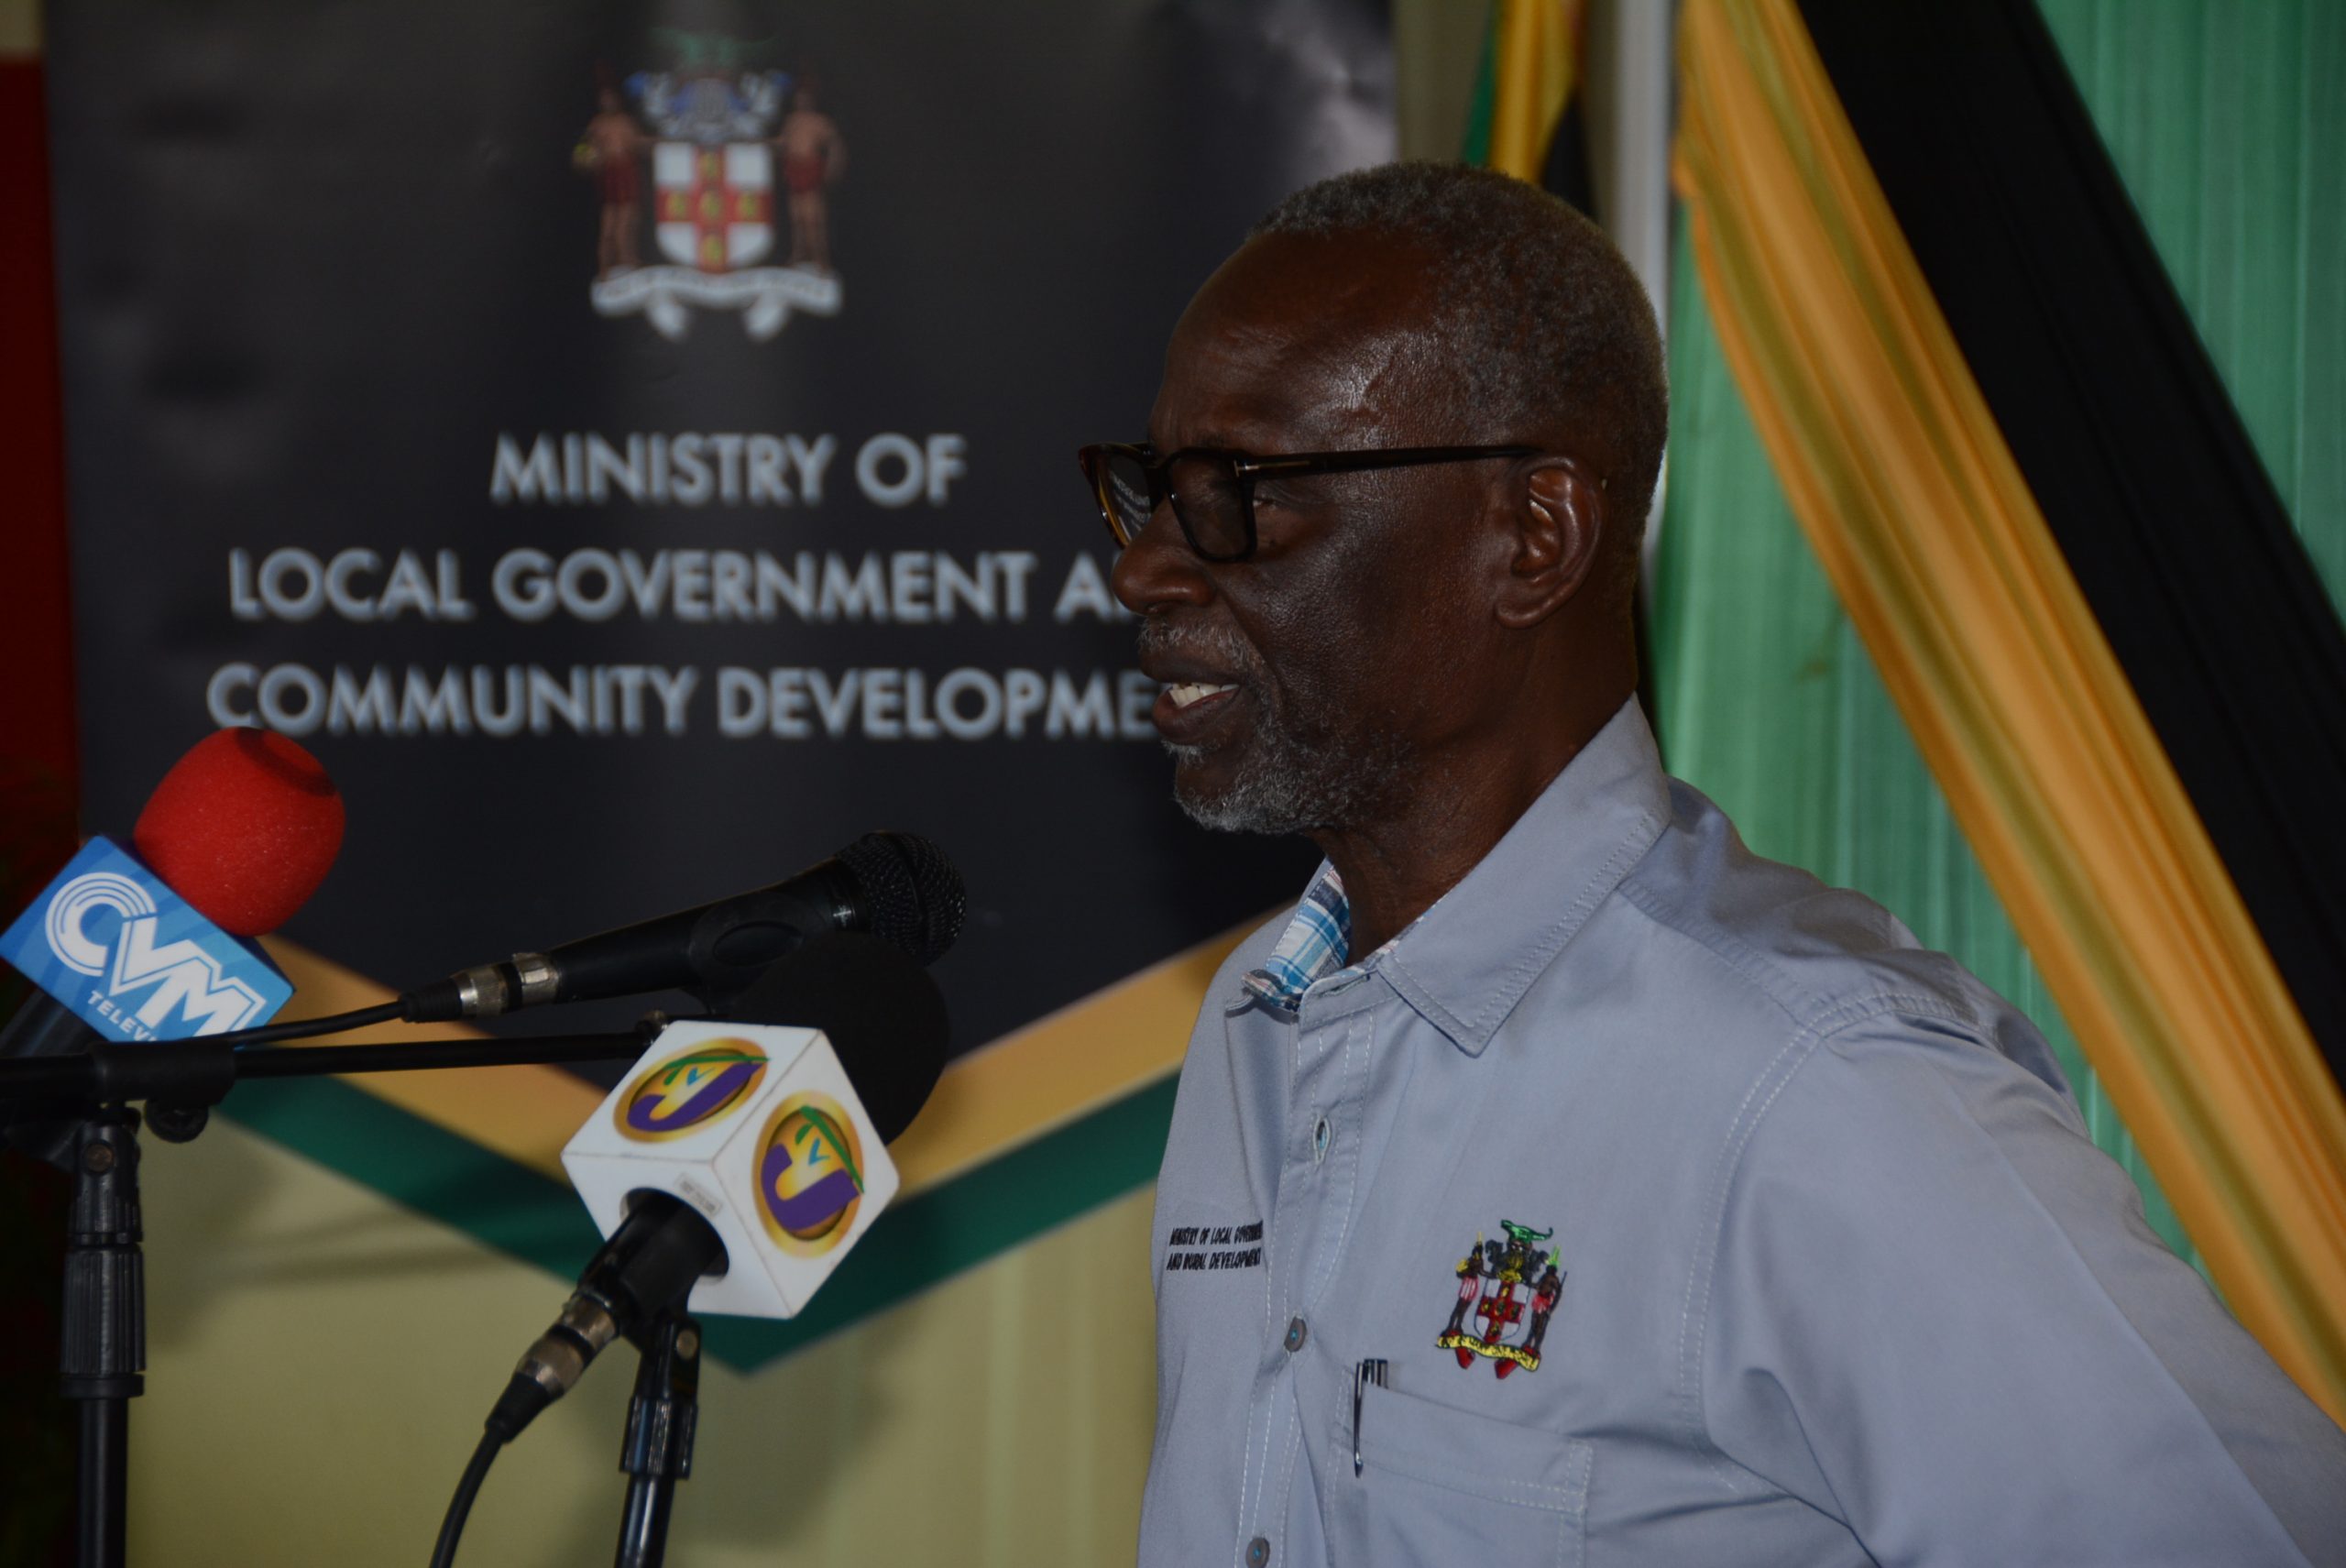 MINISTER MCKENZIE HIGHLIGHTS IMPORTANCE OF LOCAL GOVERNANCE